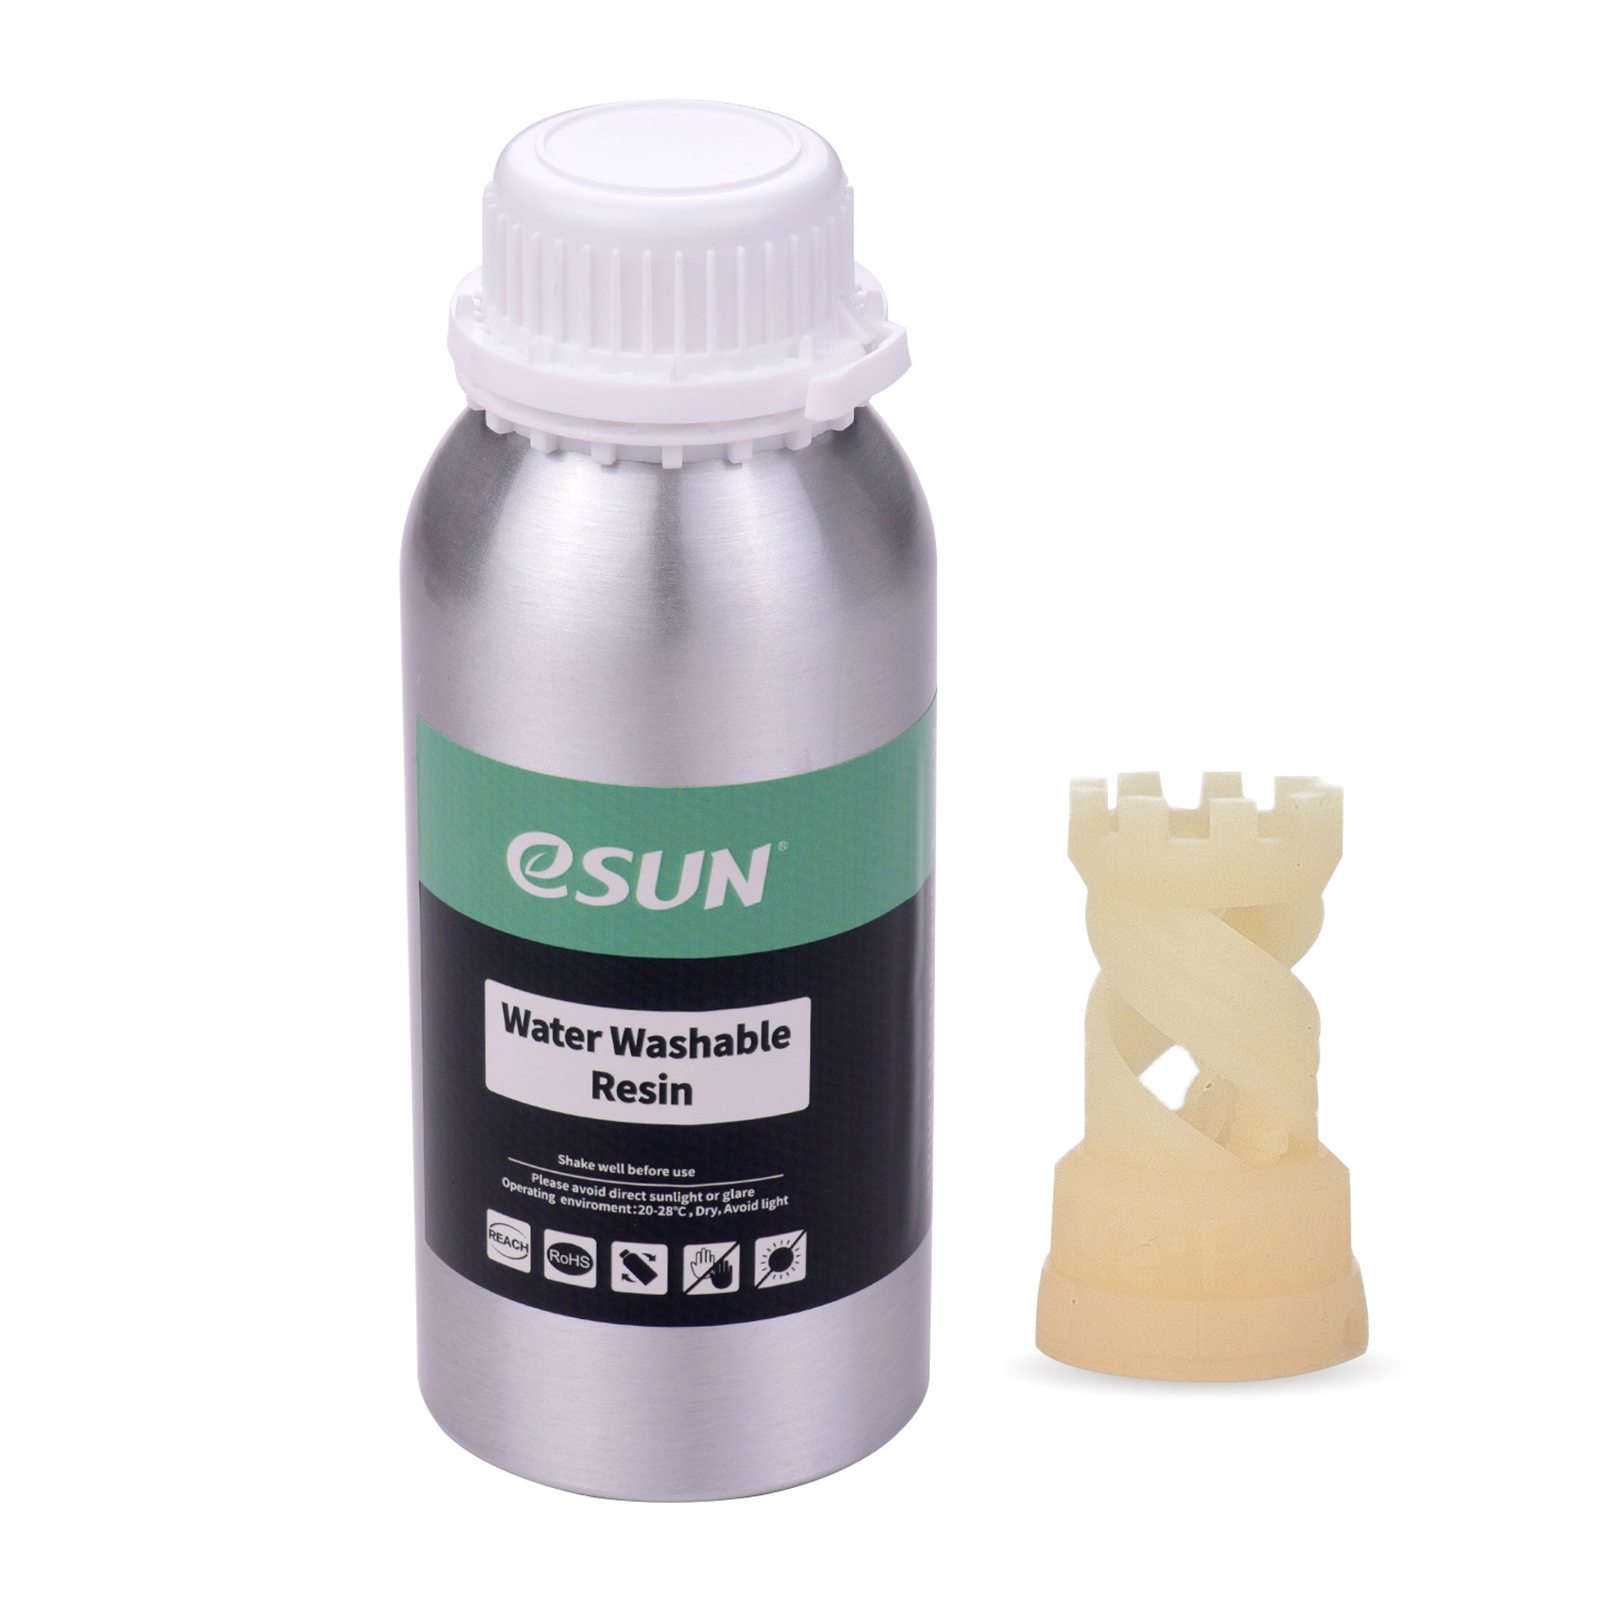 eSUN Water Washable Resin for LCD 3D Printer Aluminum Bottle Liquid Printing Material 76D Hardness Consumables Compatible with Anycubic Nova Sparkmaker Uniz Creality 3D Printers Accessories 500g/Bottle Skin-Colored